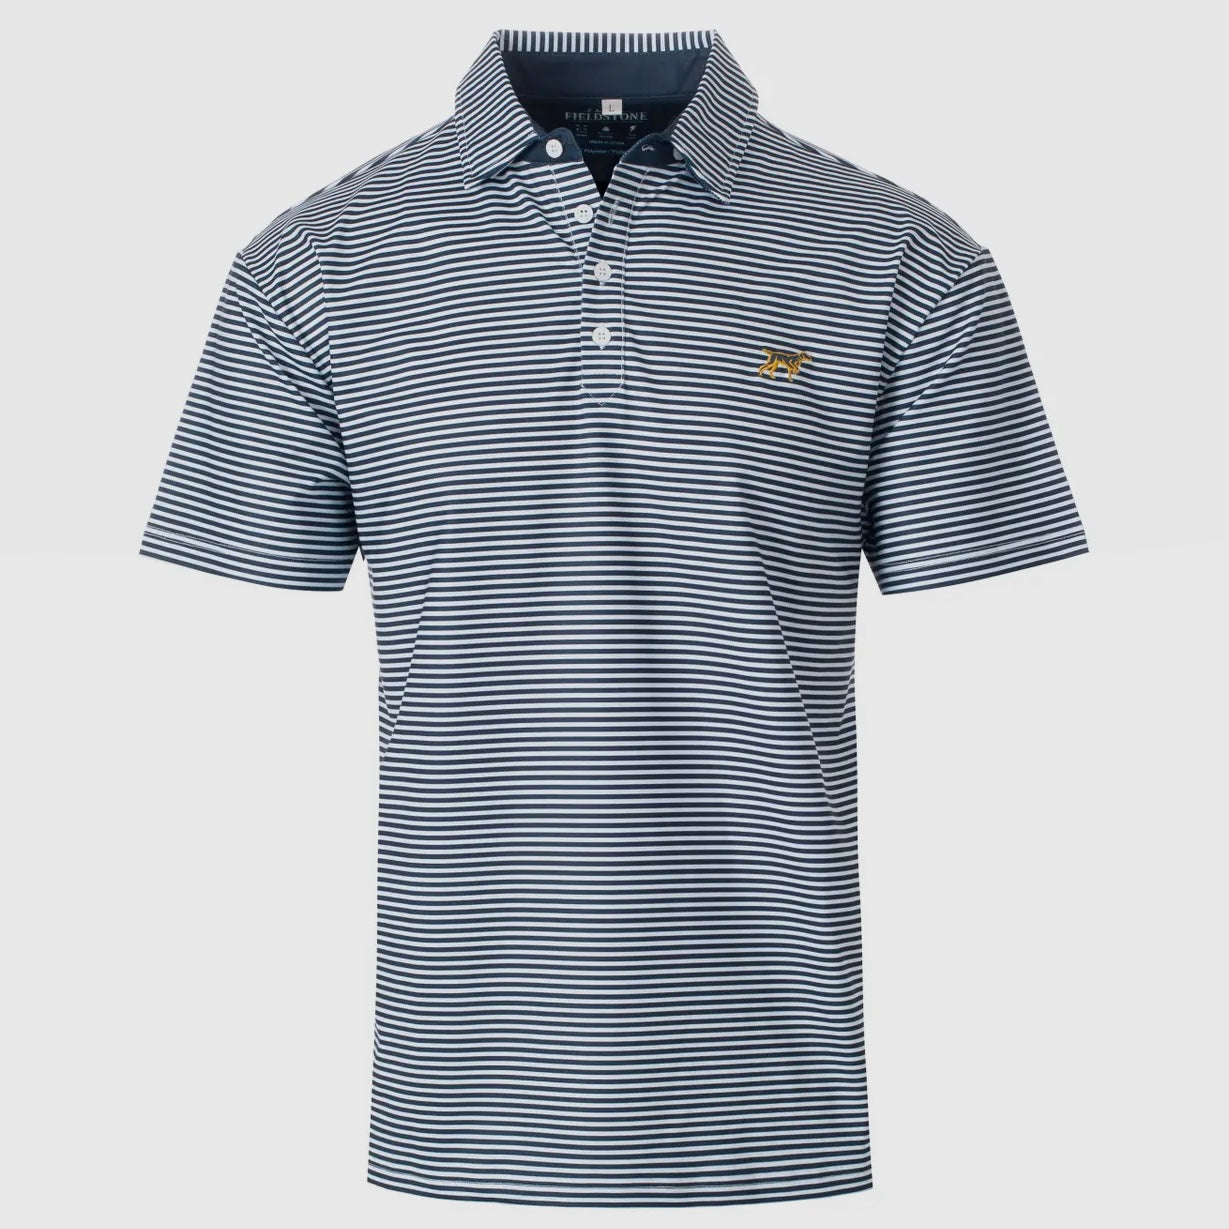 Roost Polo Navy